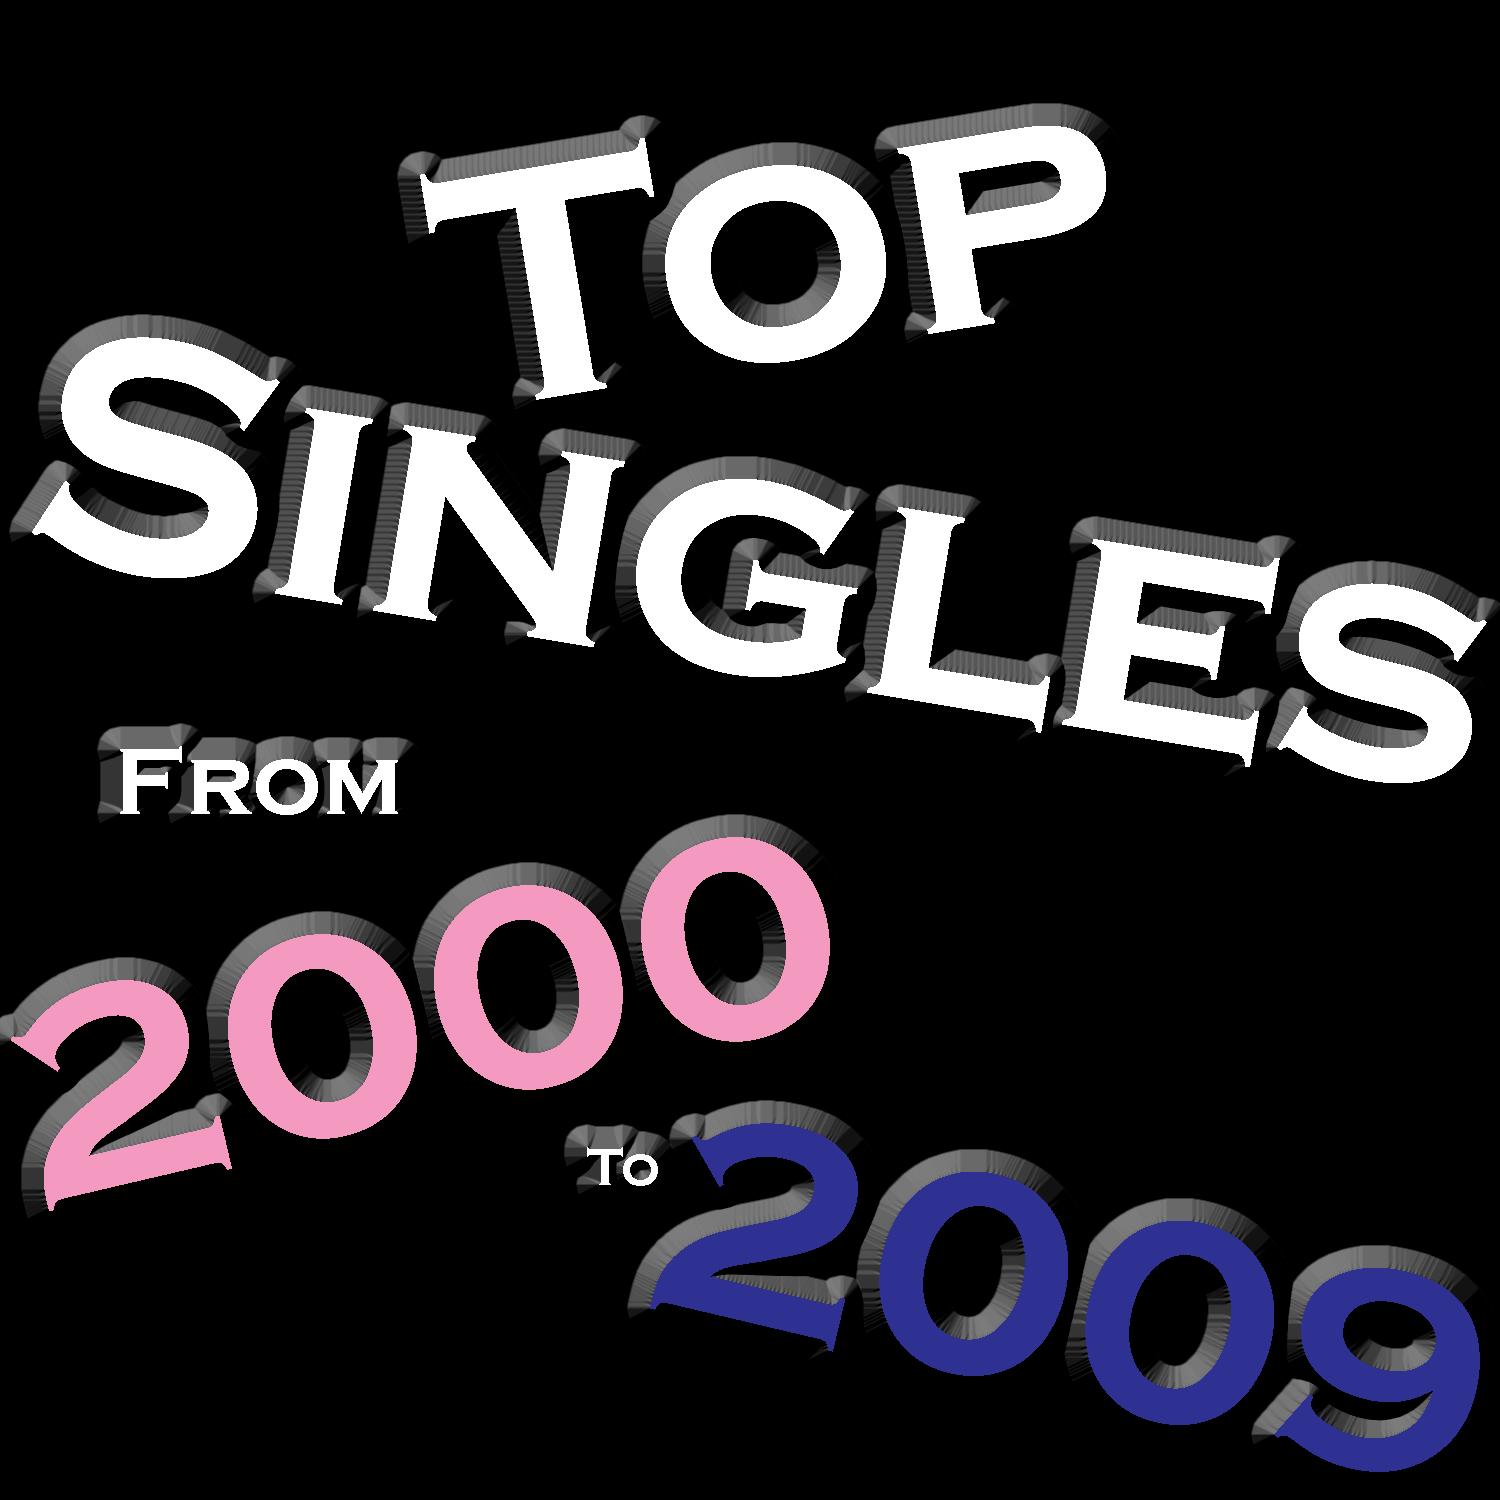 Top Singles From - 2000 - 2009